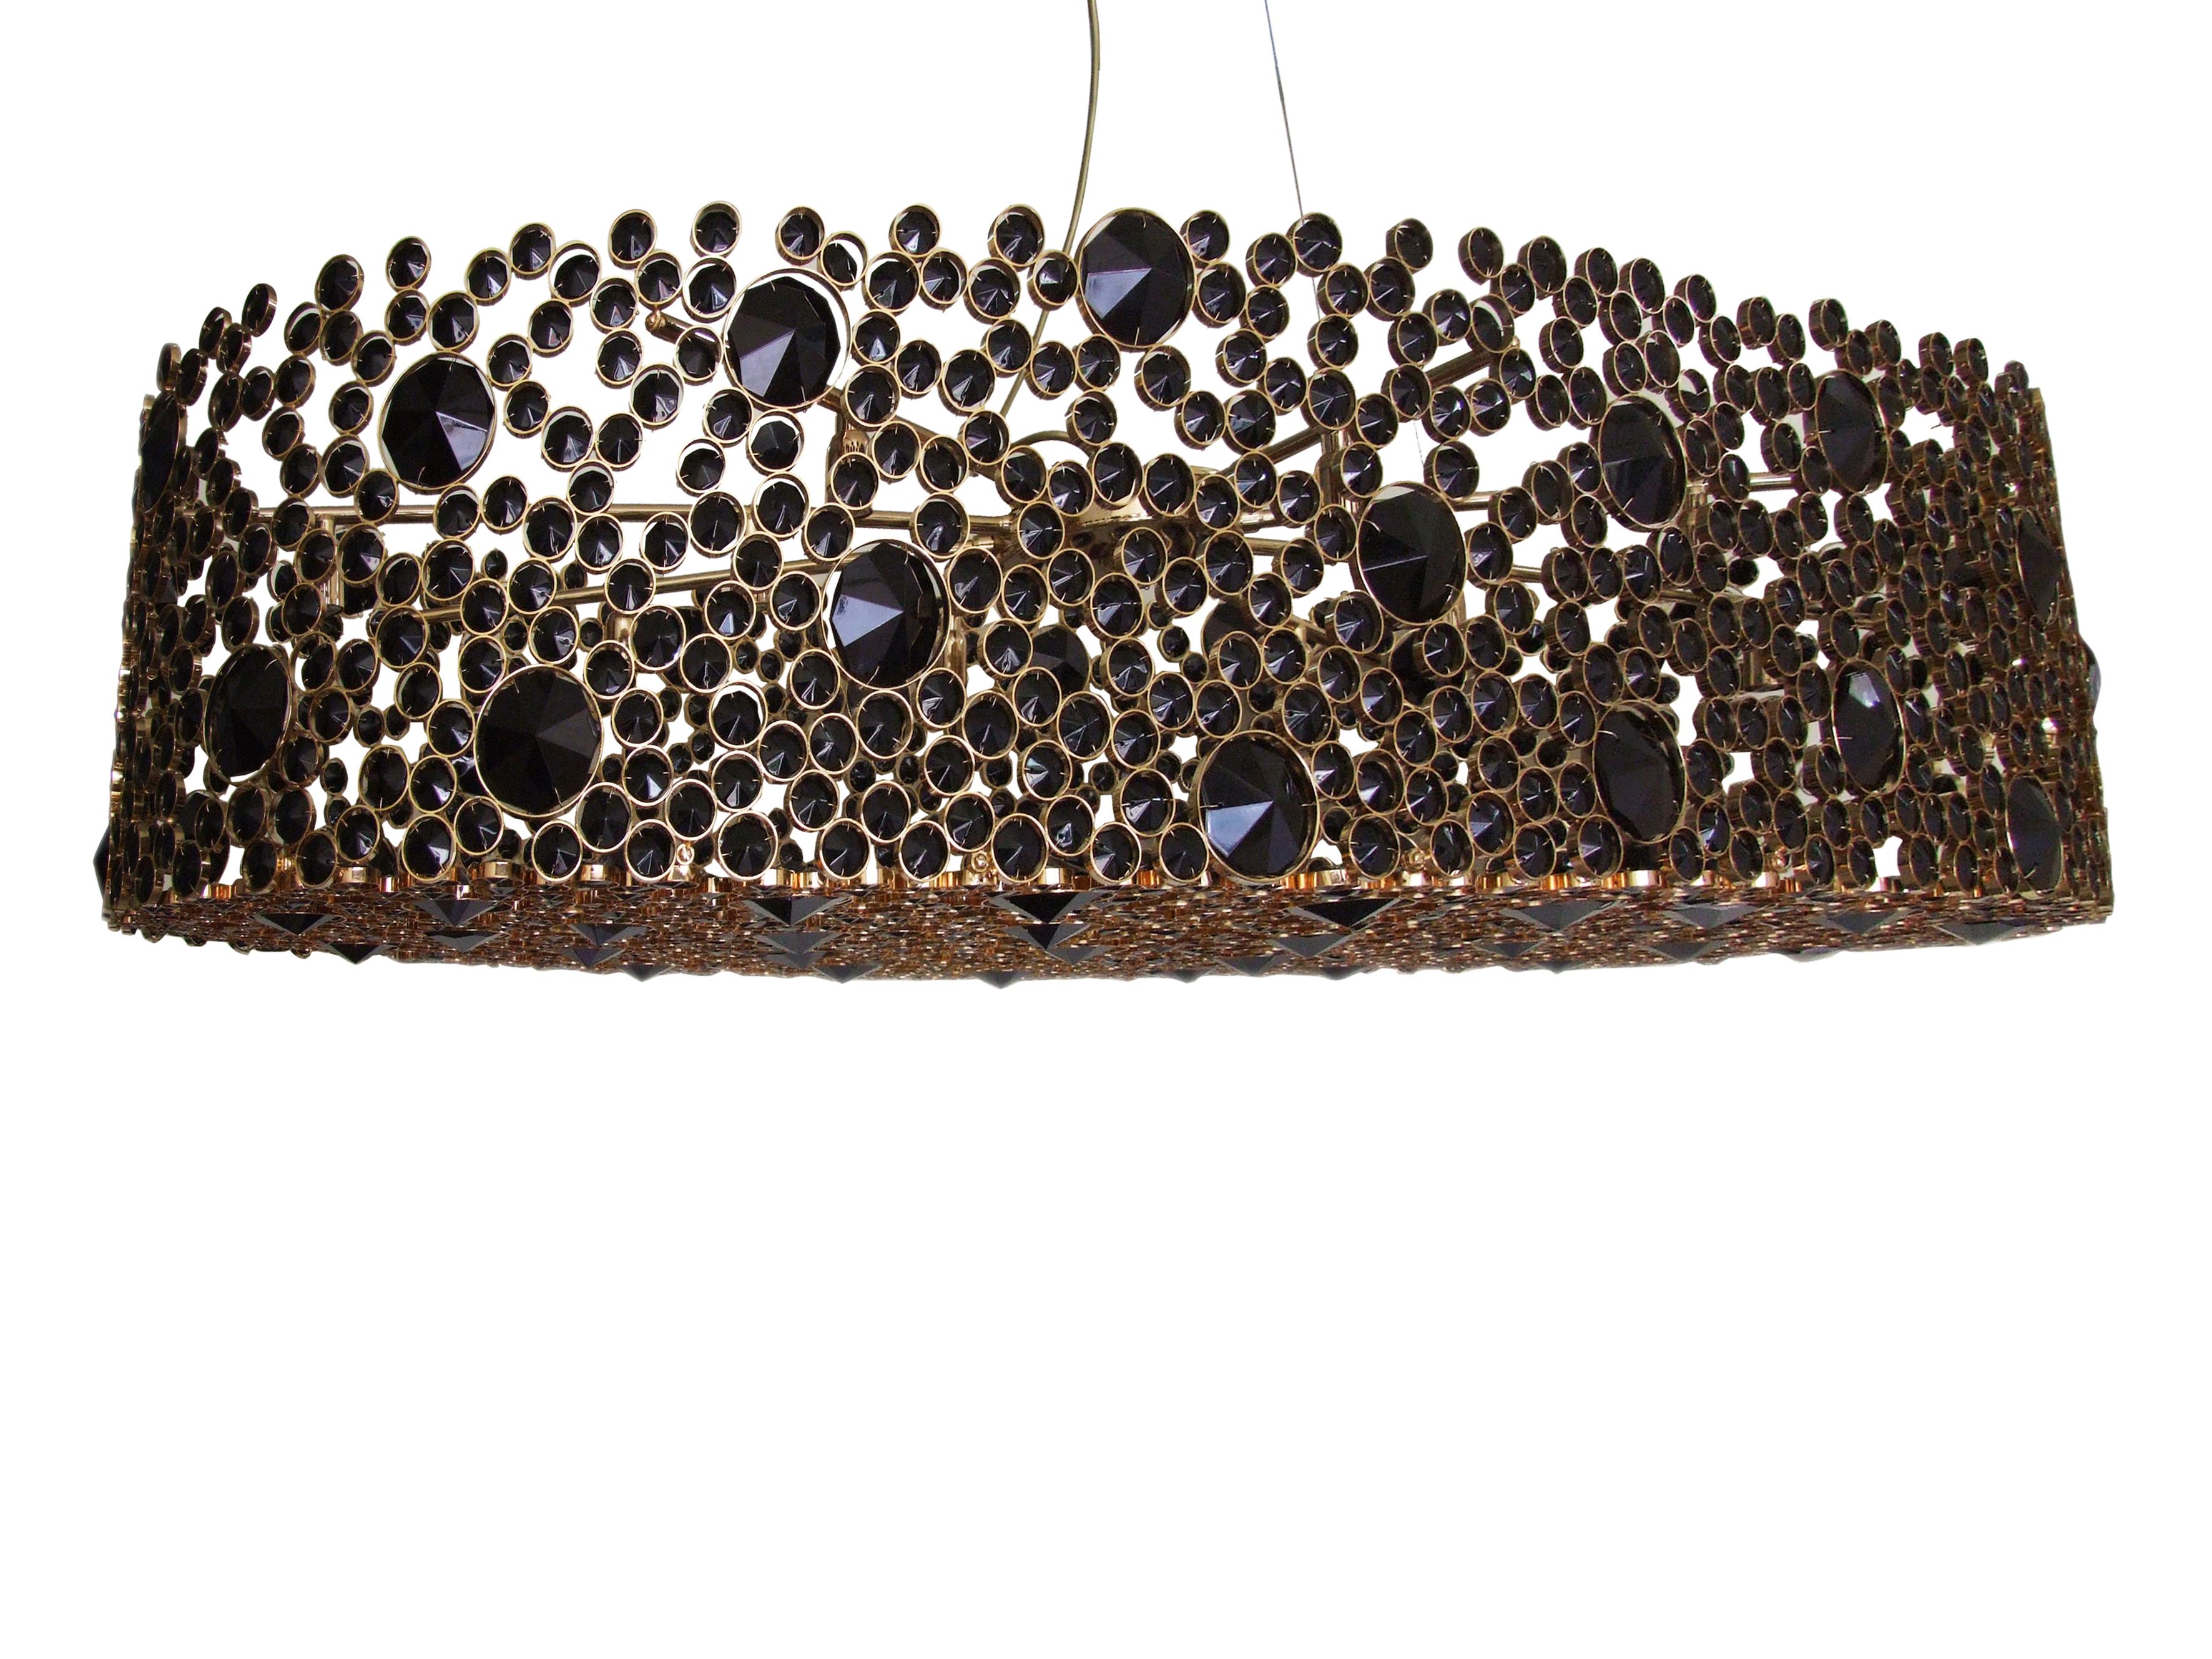 The elegant silhouette of this chandelier takes its brilliance from the skillful application of the crystal. The eternal circles are individually wrapped in brass and placed with astonishing attention to detail. The end result is an extraordinary